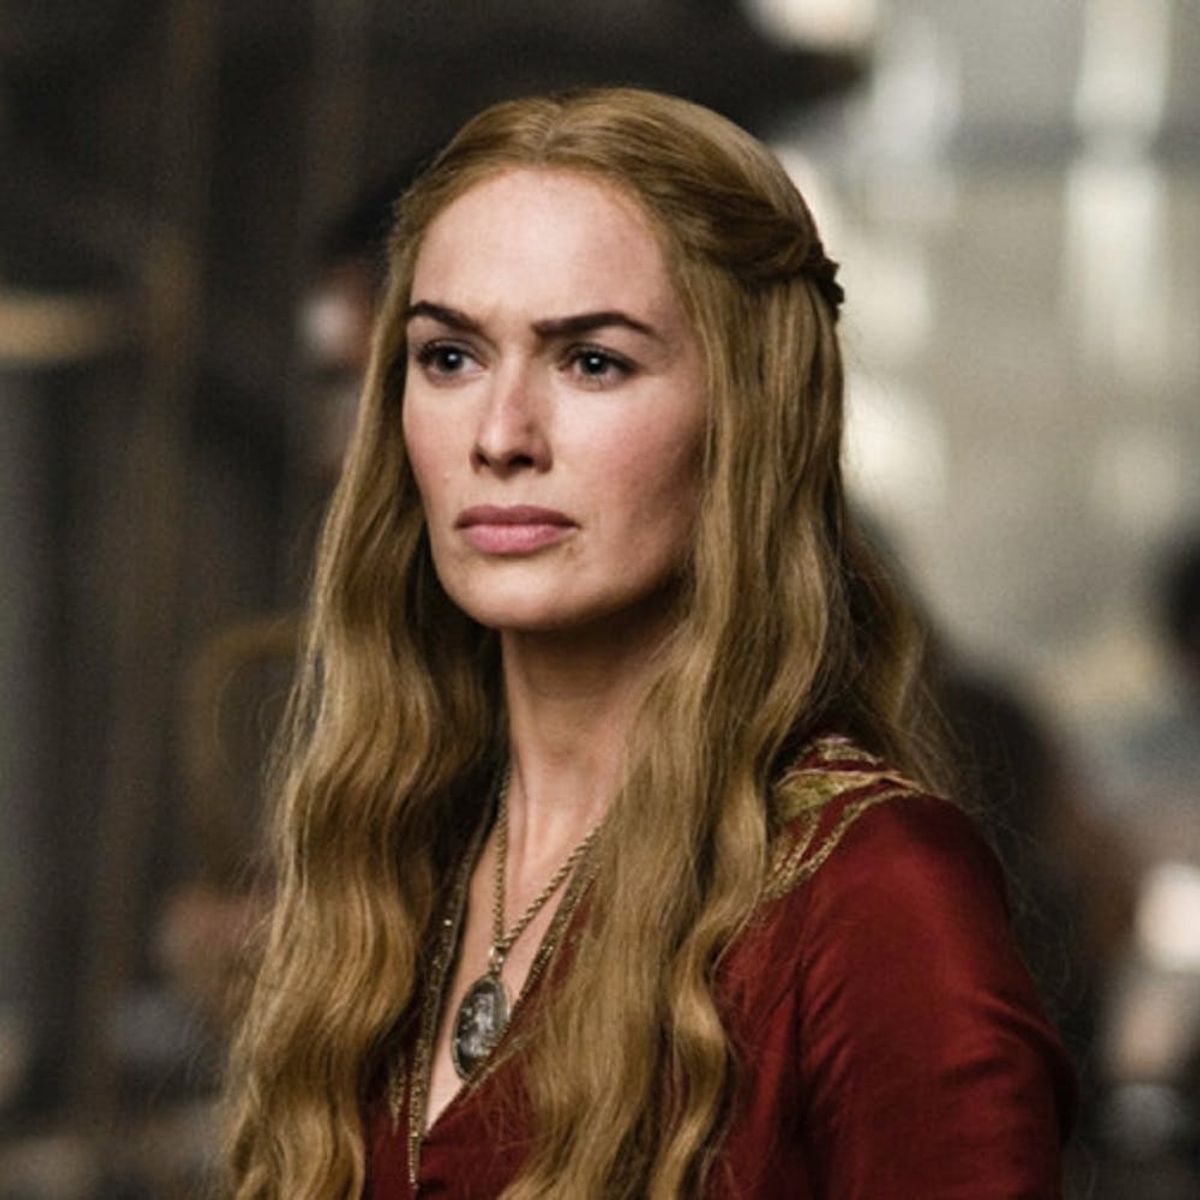 Game of Thrones’ Lena Headey Opens Up About Battling Postpartum Depression While Filming